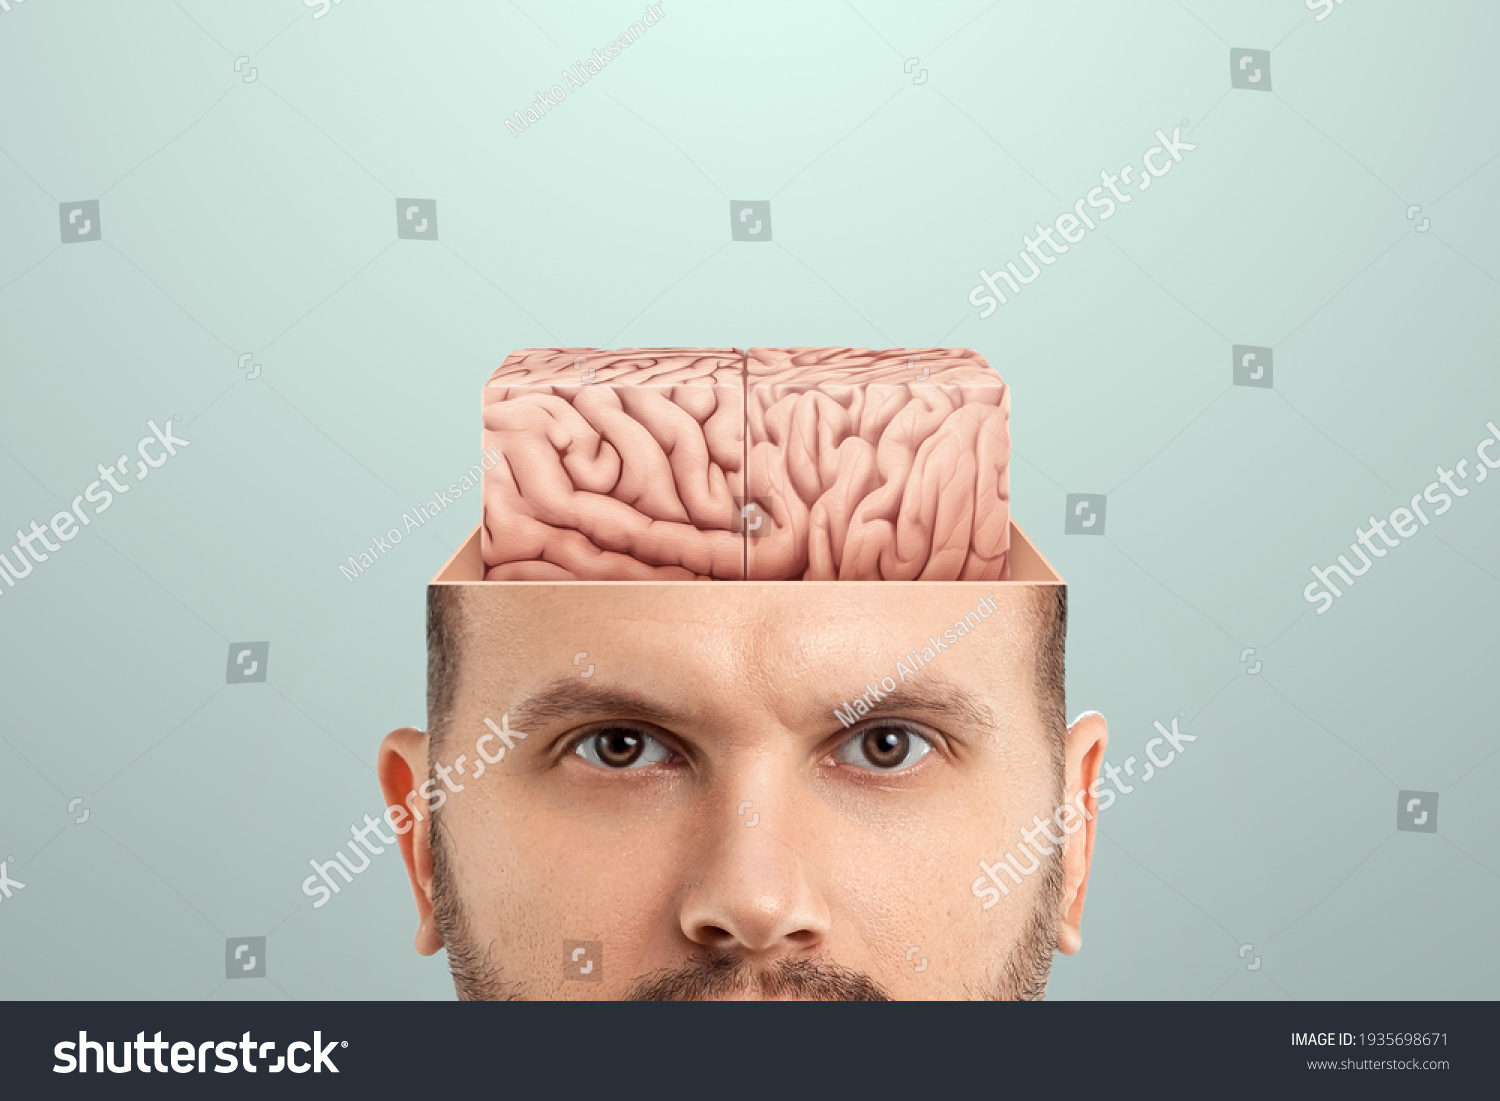 The concept of non-standard thinking and creativity., The male head is open from which the square brain is visible. Creative background, brain, fantasy, genius, creativity, not what it seems #1935698671